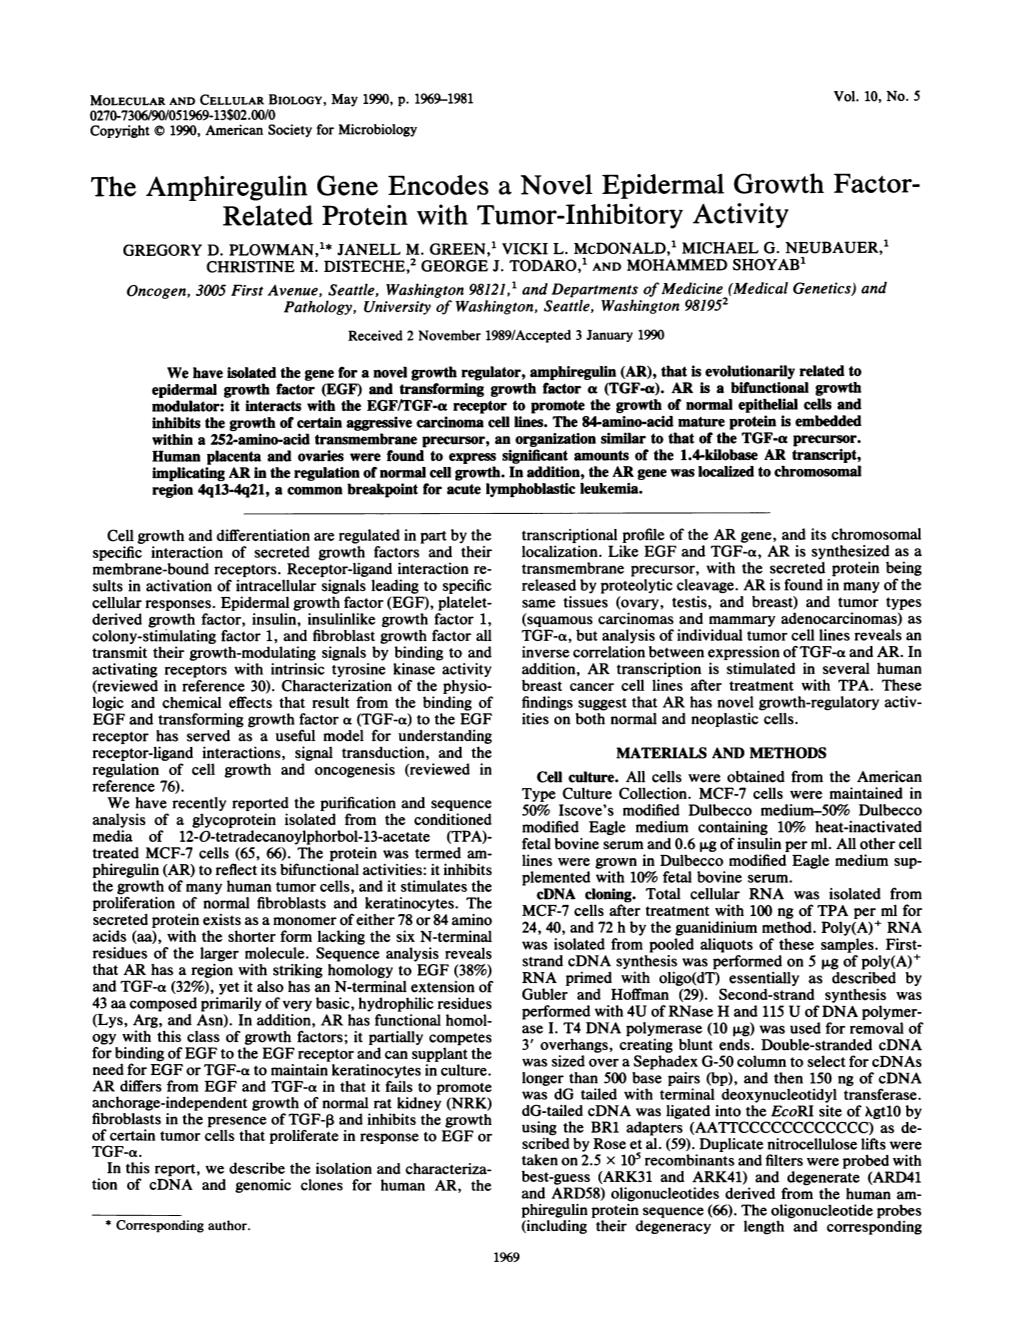 The Amphiregulin Gene Encodes a Novel Epidermal Growth Factor- Related Protein with Tumor-Inhibitory Activity GREGORY D